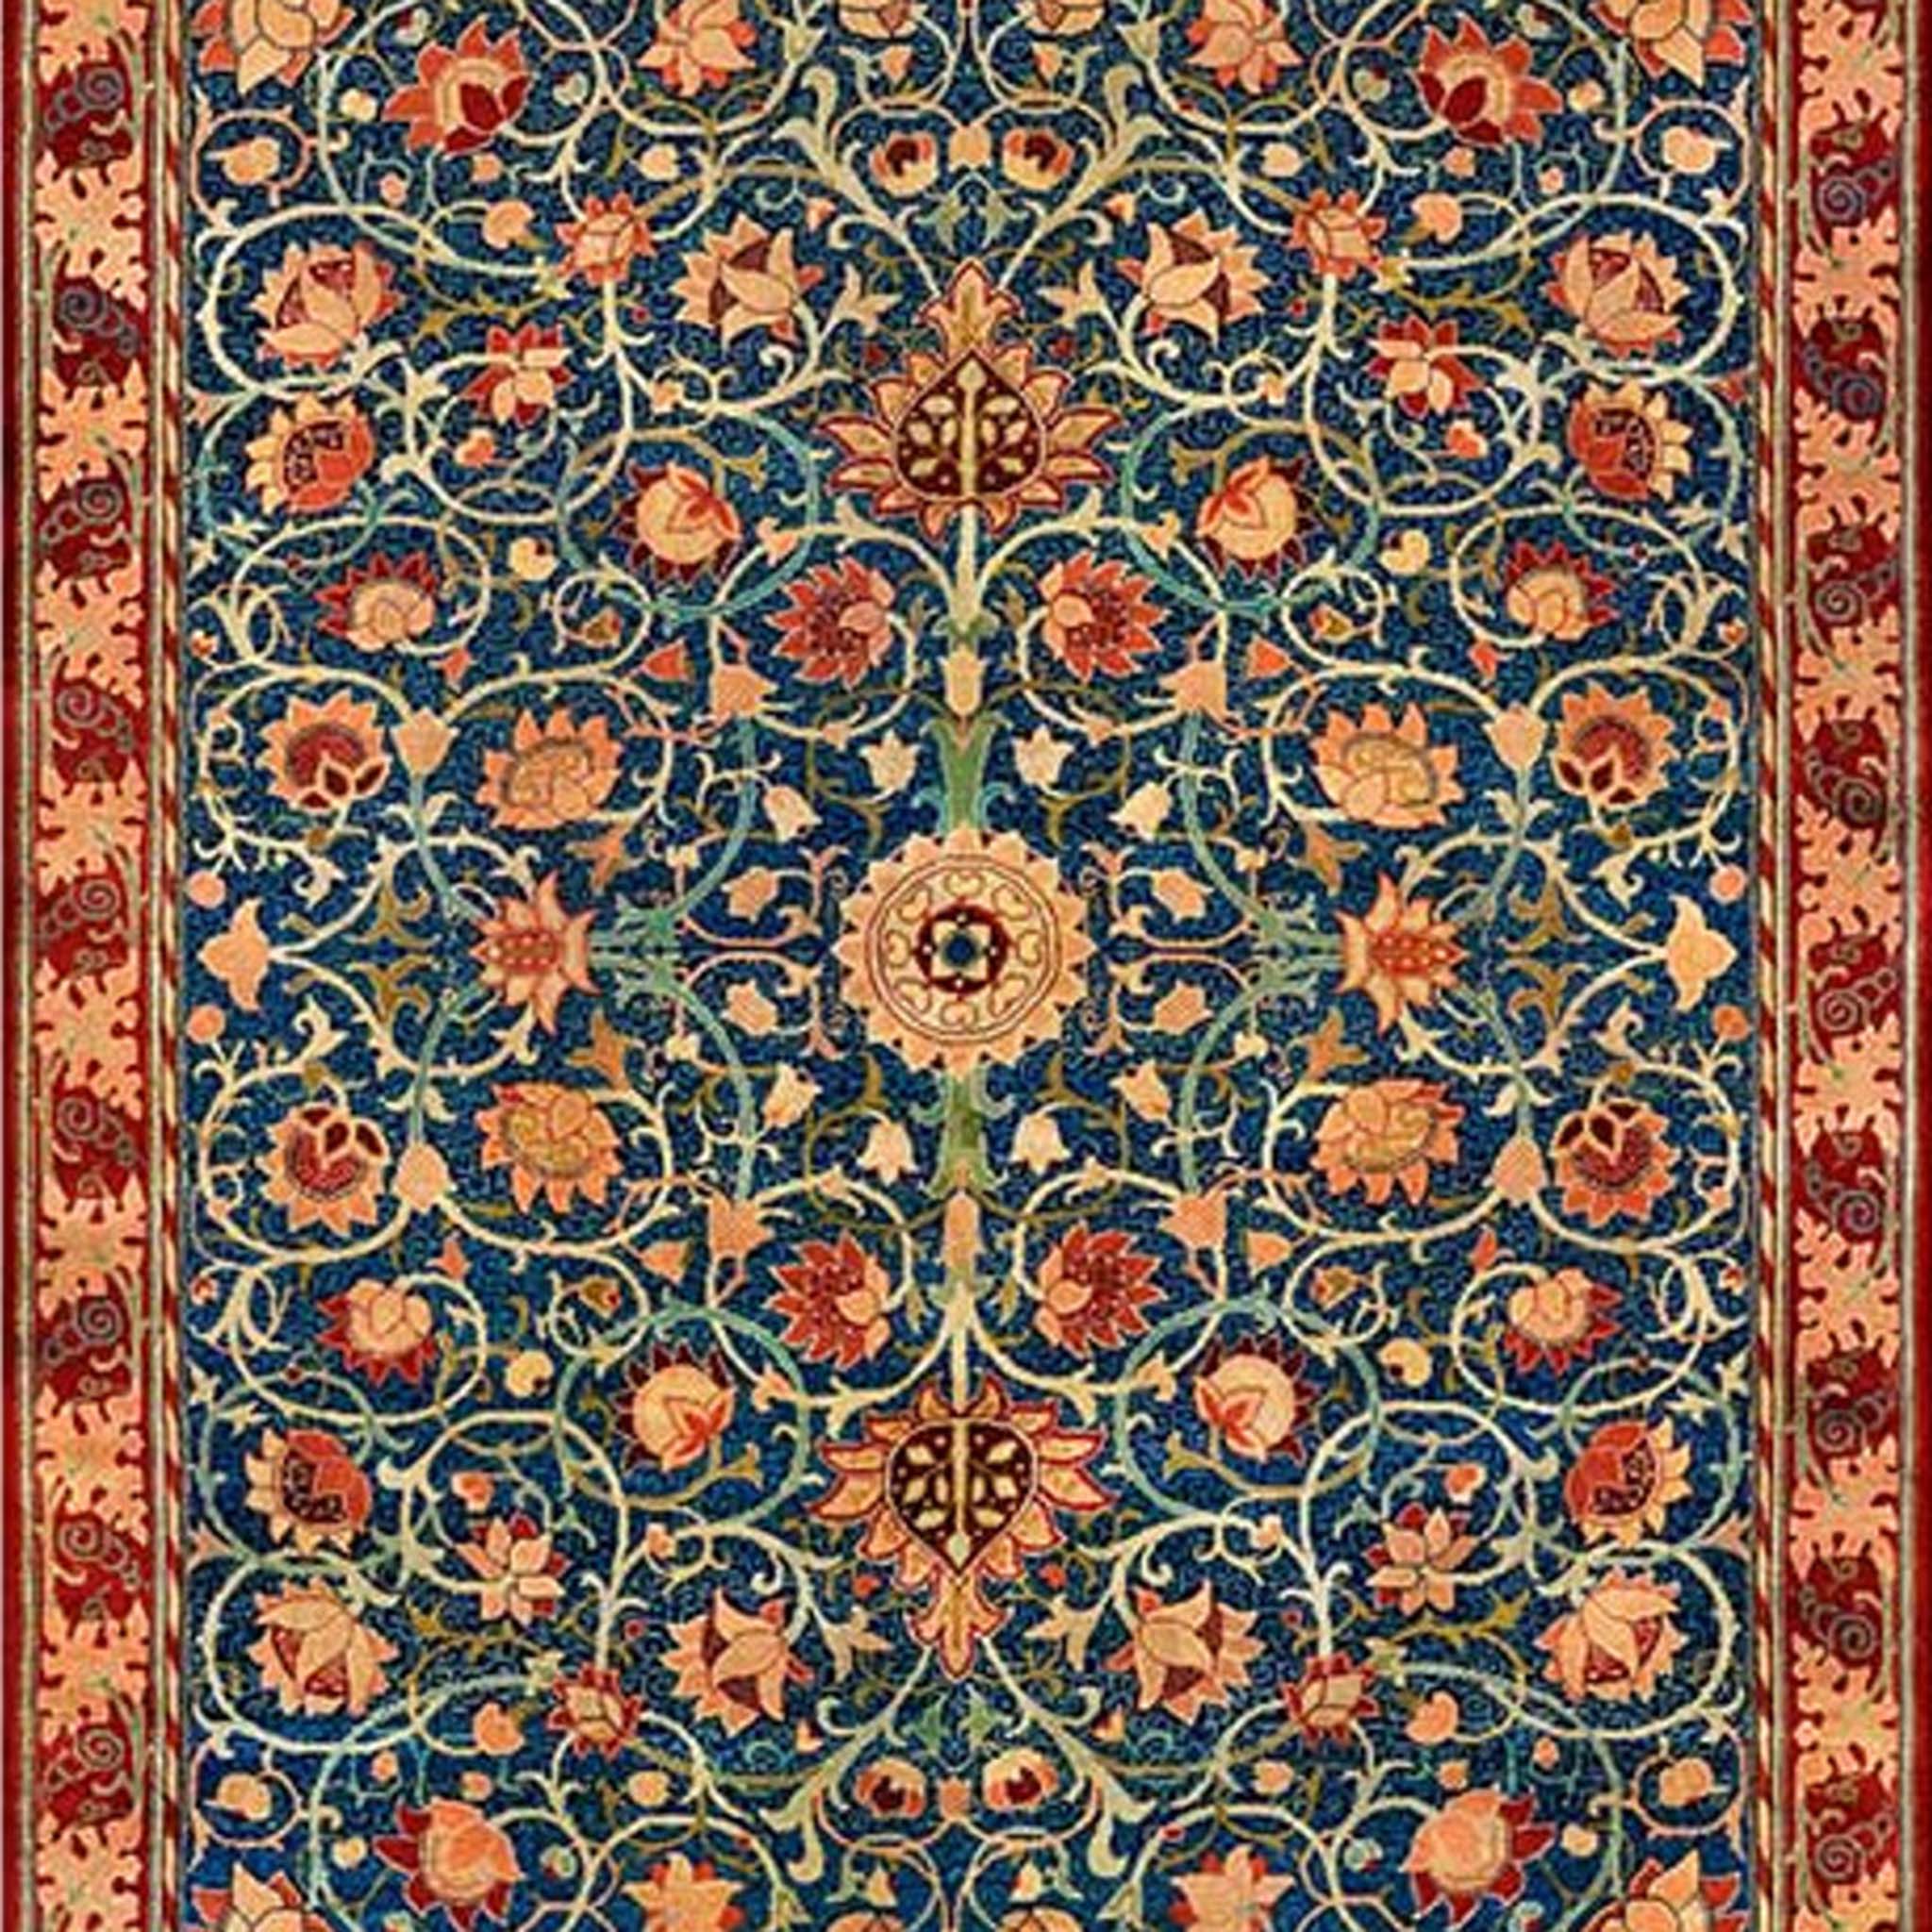 Close-up of an A2 rice paper design of a vintage carpet of reds and blues and features a repeating floral pattern.